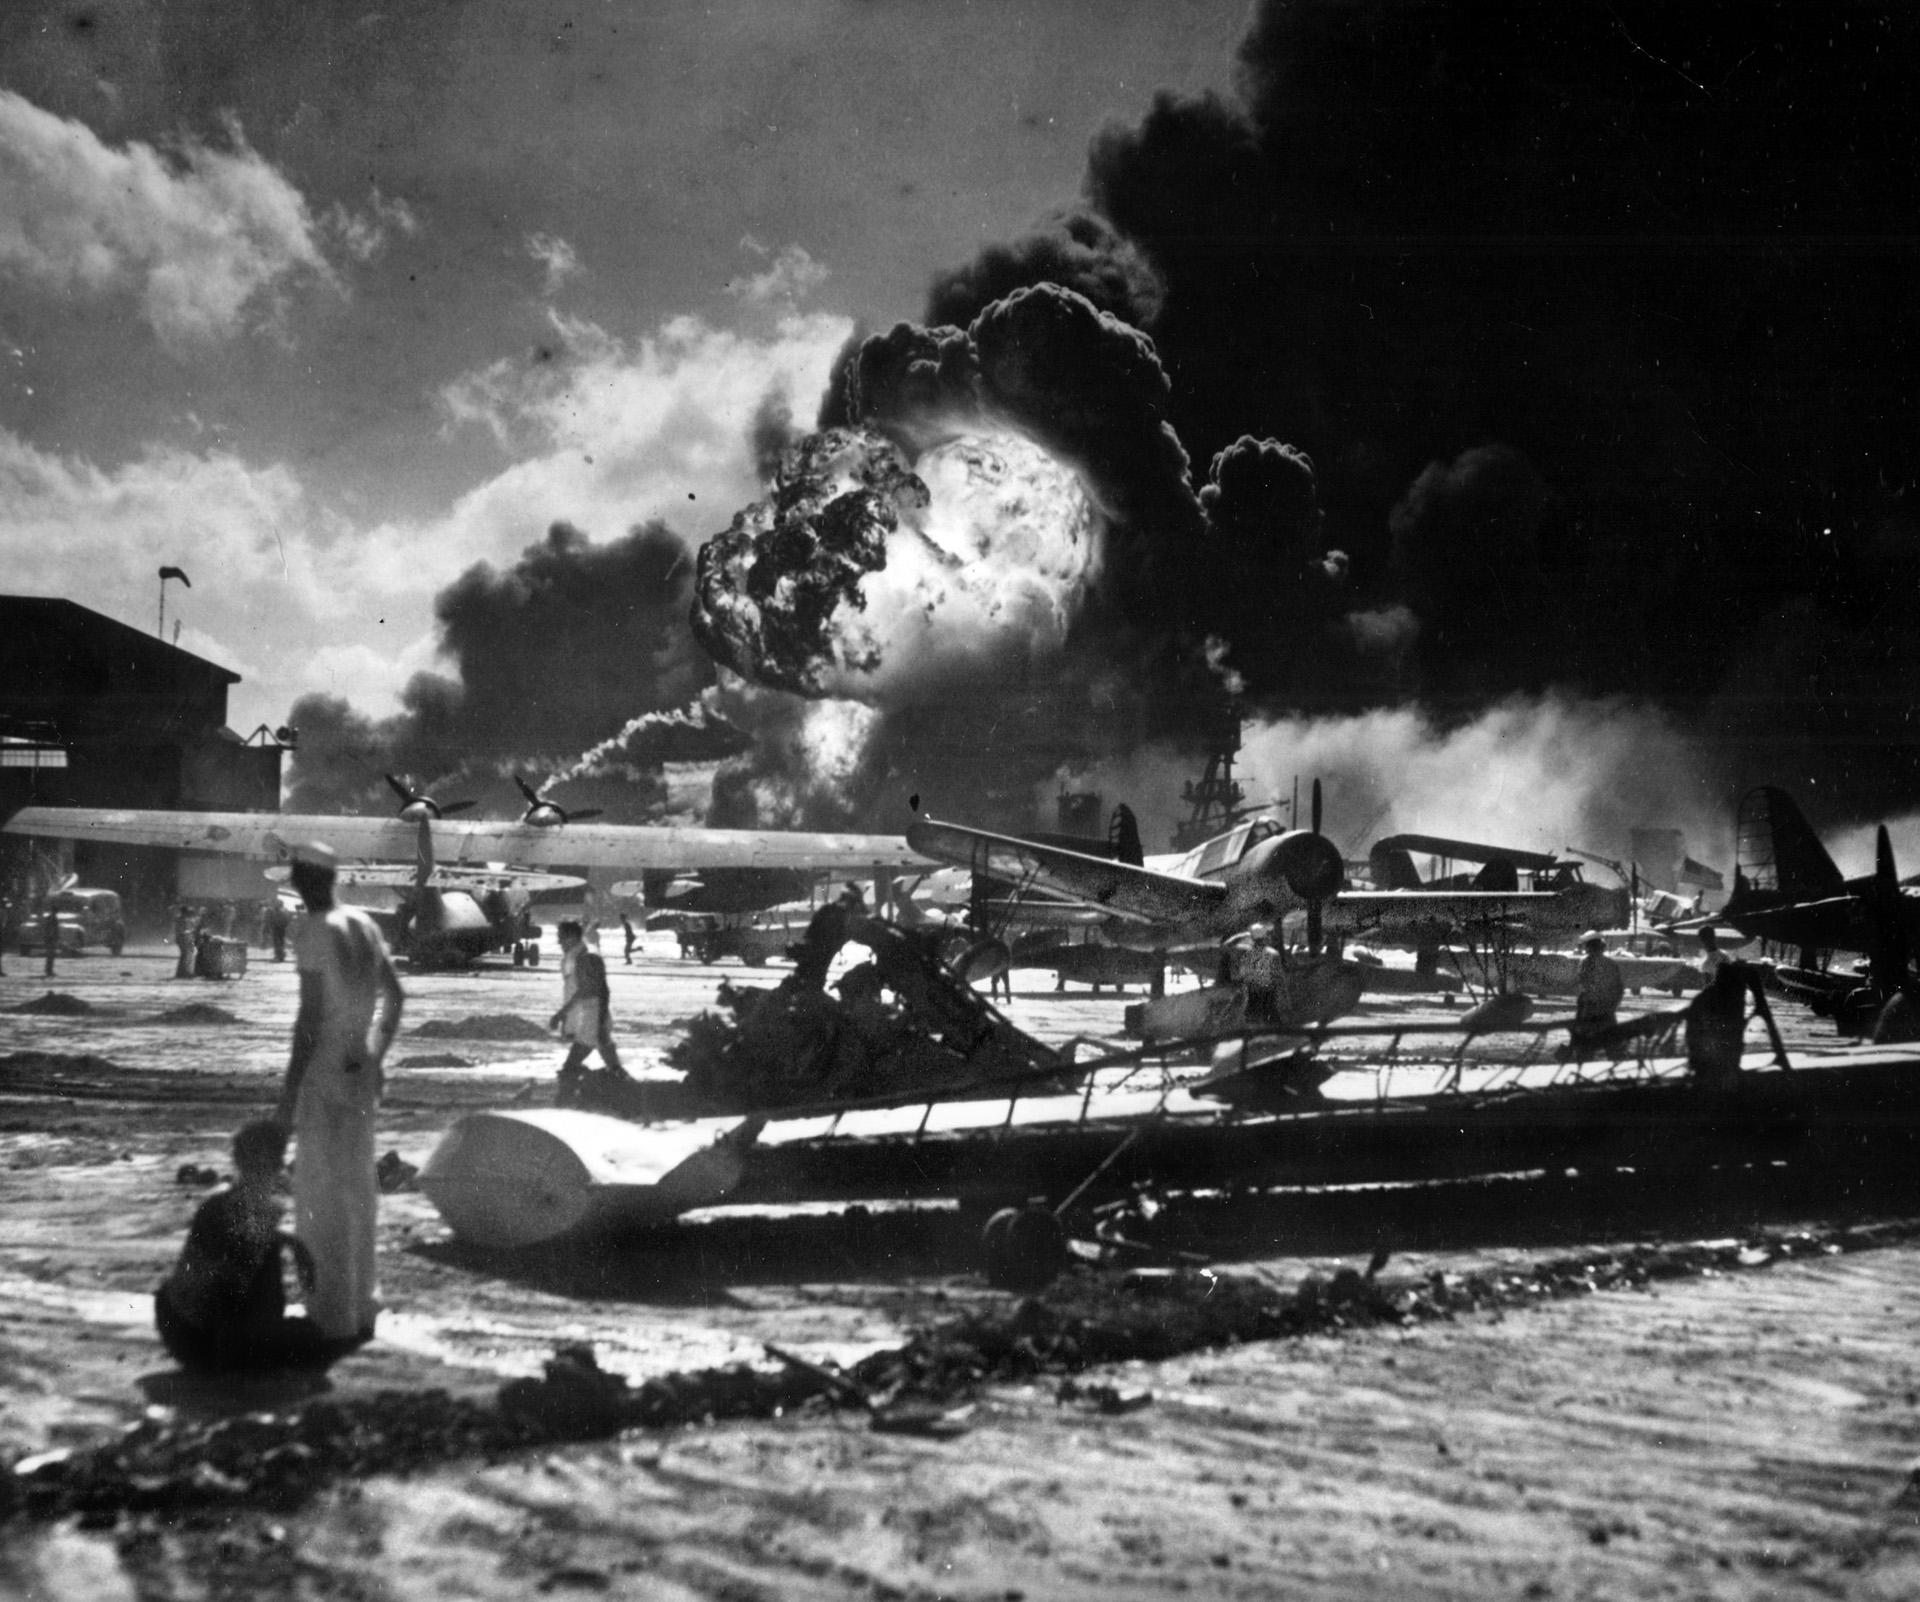 Planes explode at Ford Island, Pearl Harbor Naval Base, on December 7, 1941. The Japanese attack ignited a wave of fear and hatred toward anyone who looked Japanese. The result was the forced relocation of 110,000 American citizens into 10 high-security prison camps. 